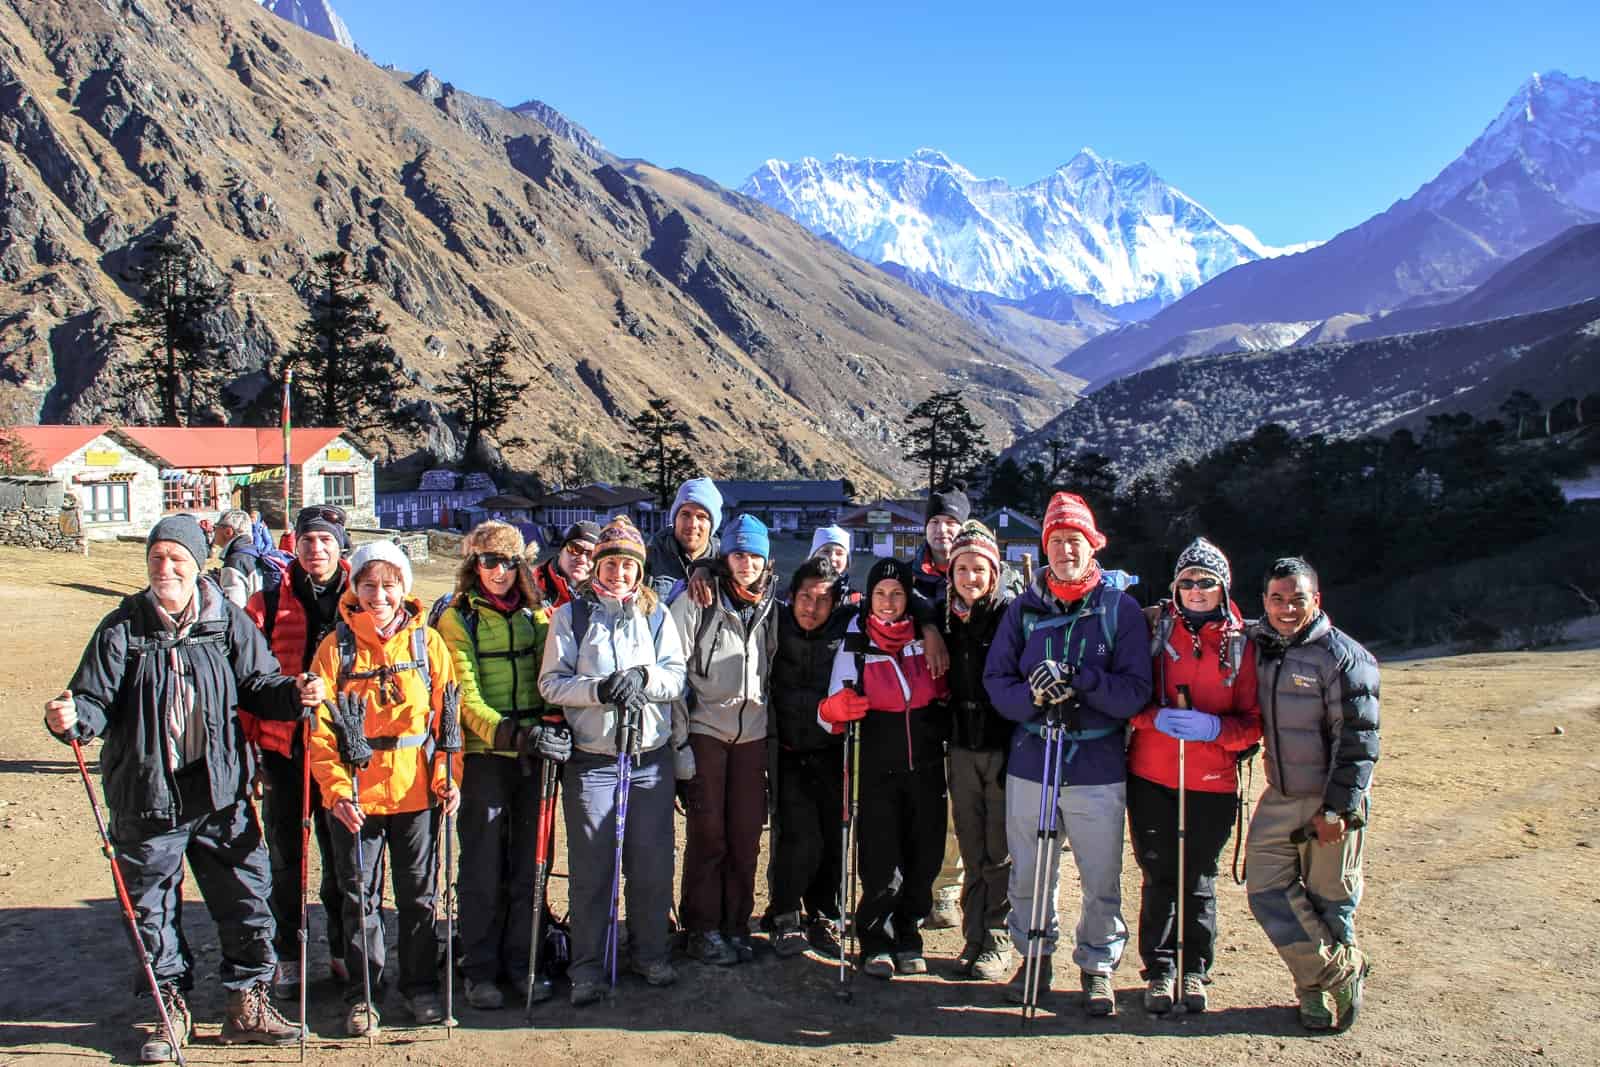 15 Everest Base Camp trekkers stand alongside their guide on the far right, outside a small complex of Nepali teahouses, backed by snow capped mountains